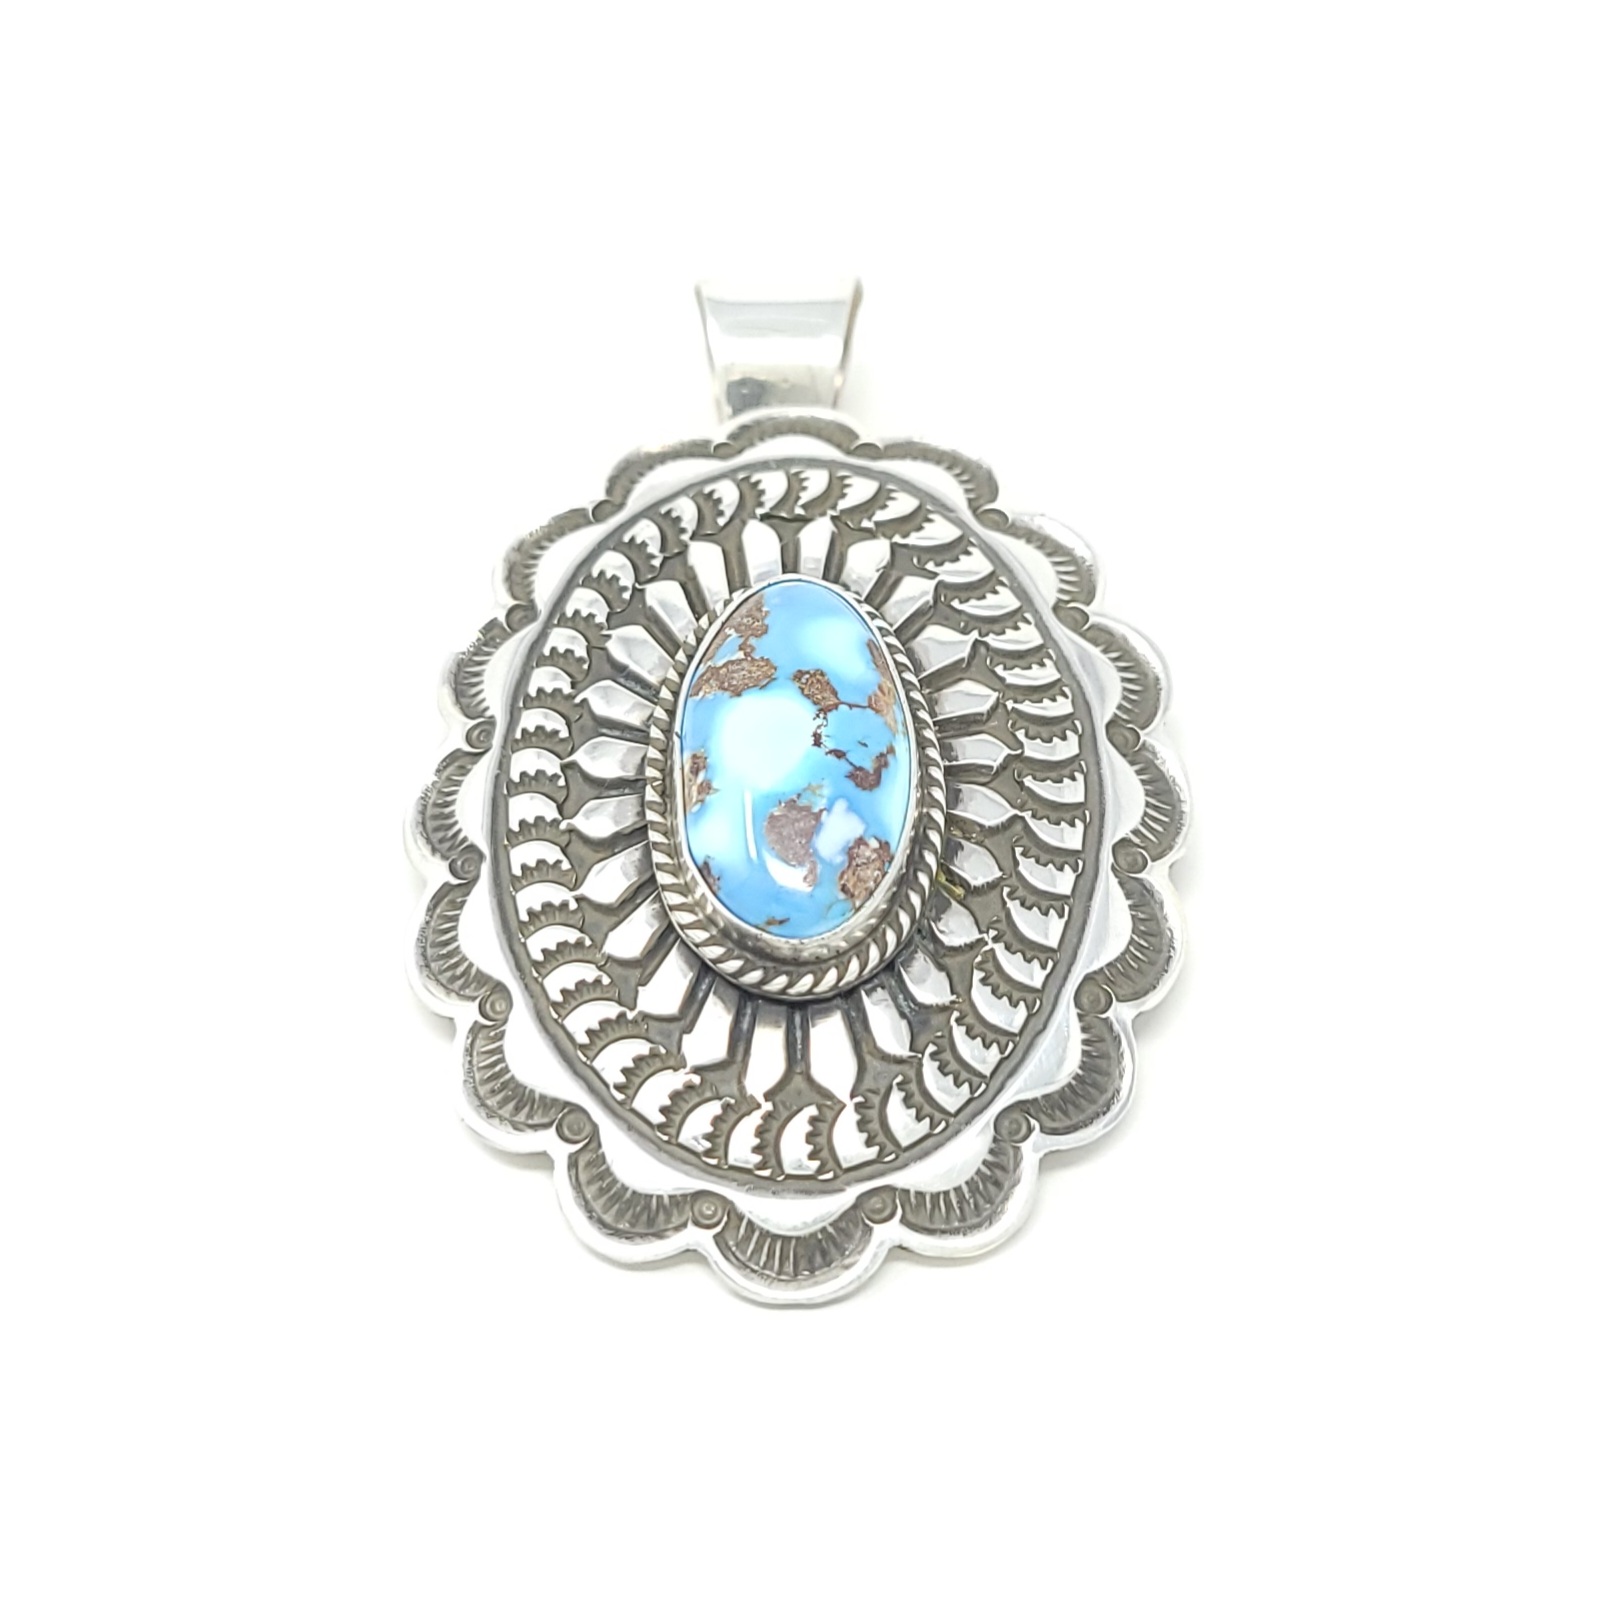 Andy Cadman Navajo Sterling Silver Old Style Pendant Golden Hill Turquoise